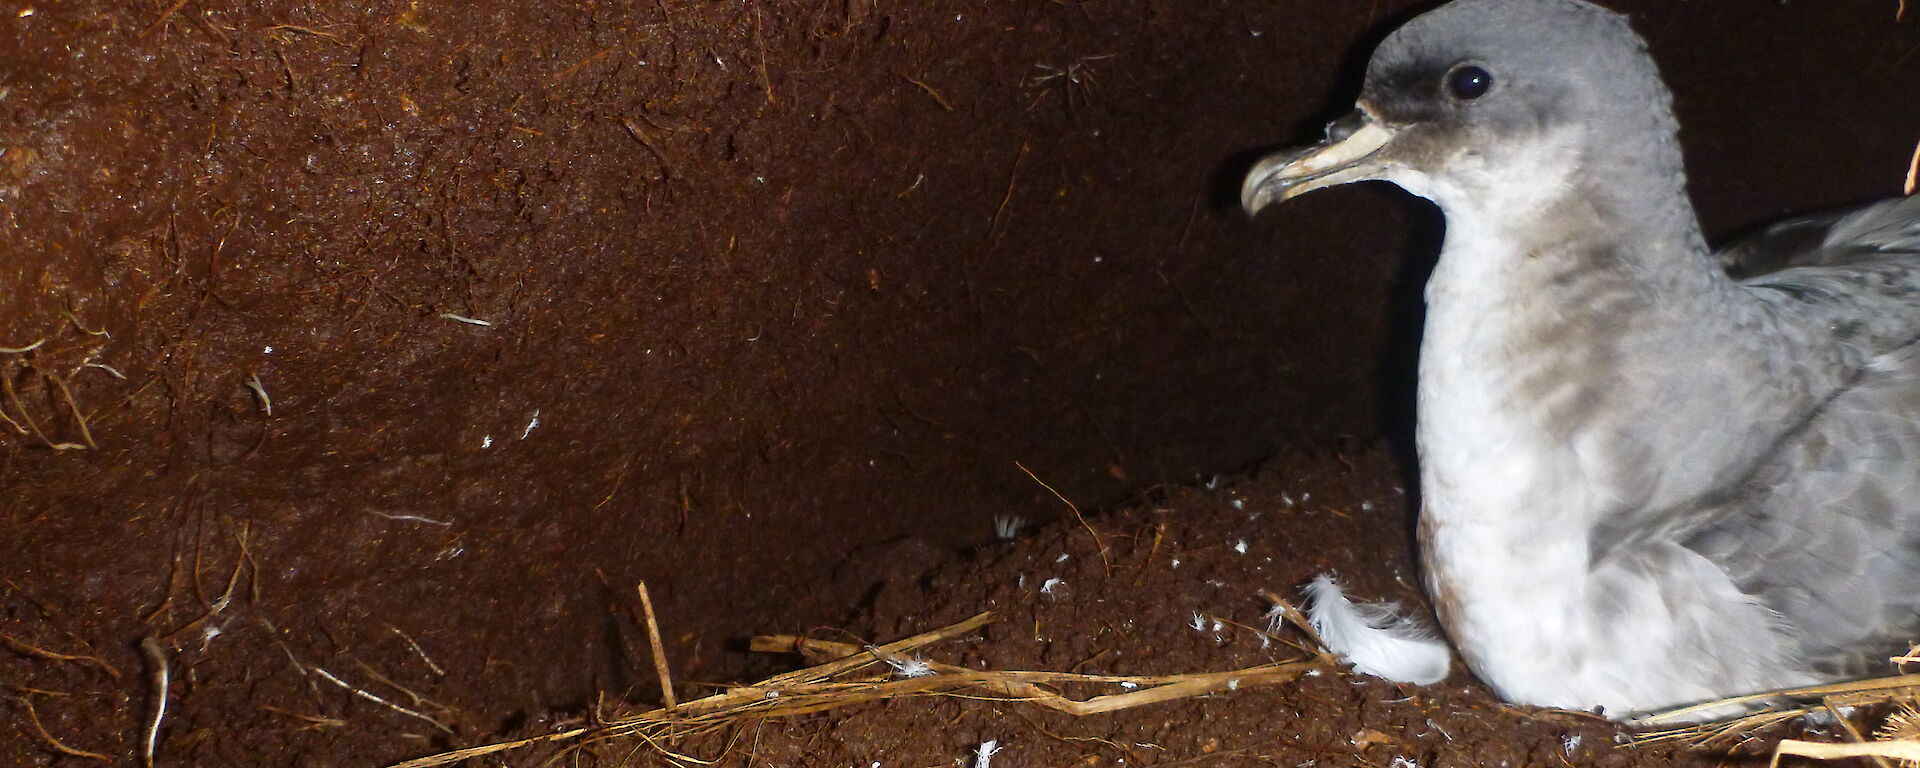 Adult grey petrel in its burrow (found with a pocket camera) — Macquarie Island